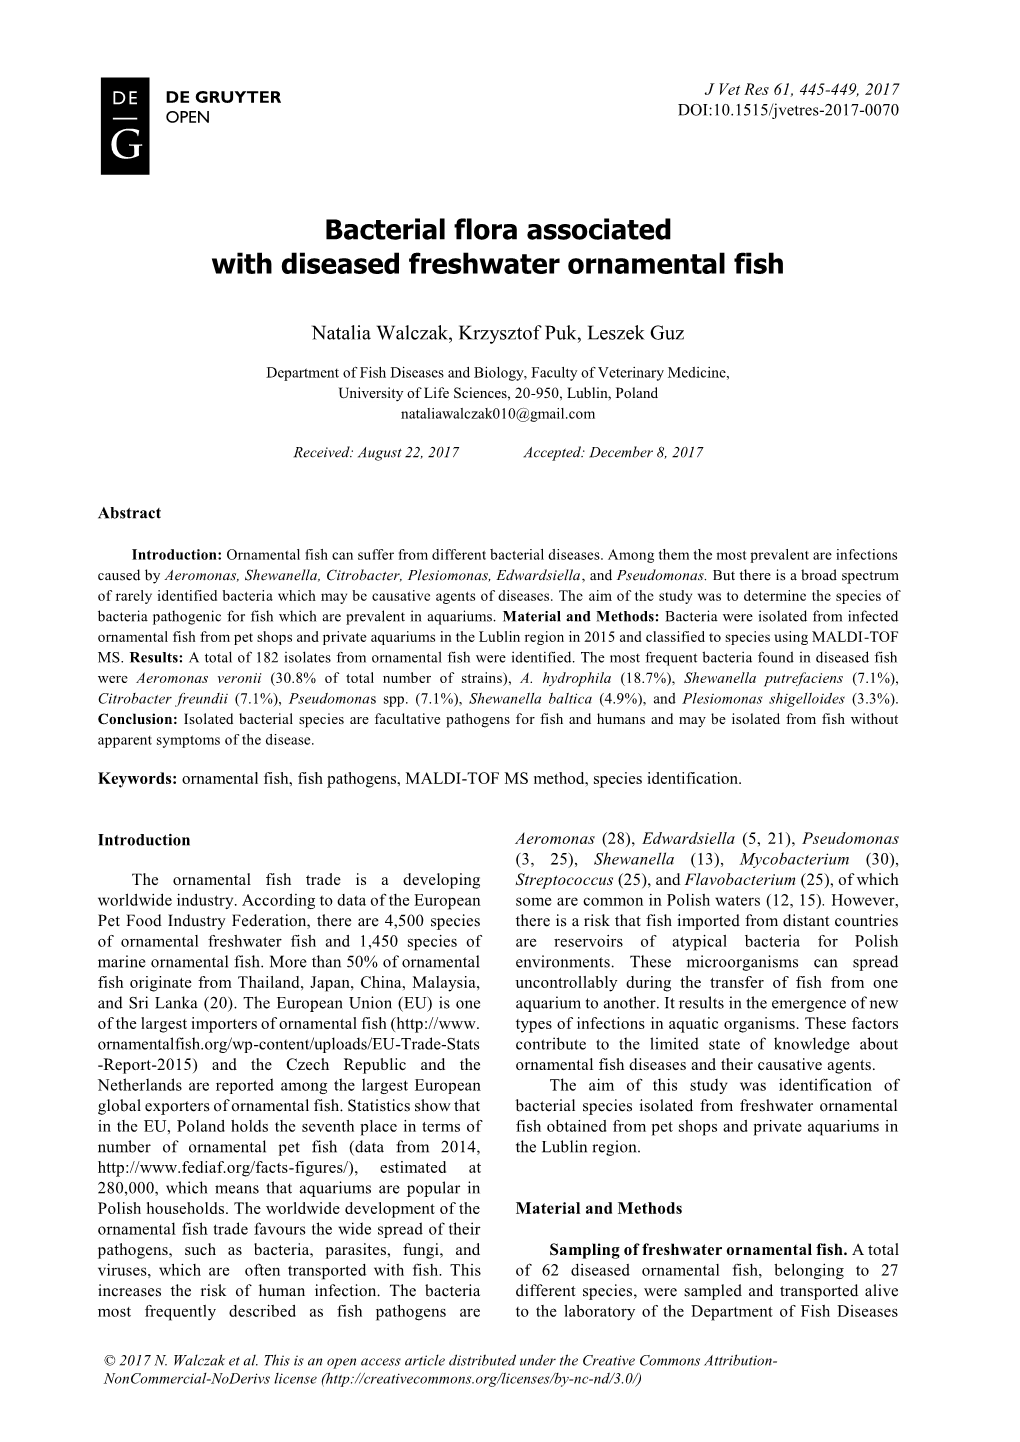 Bacterial Flora Associated with Diseased Freshwater Ornamental Fish